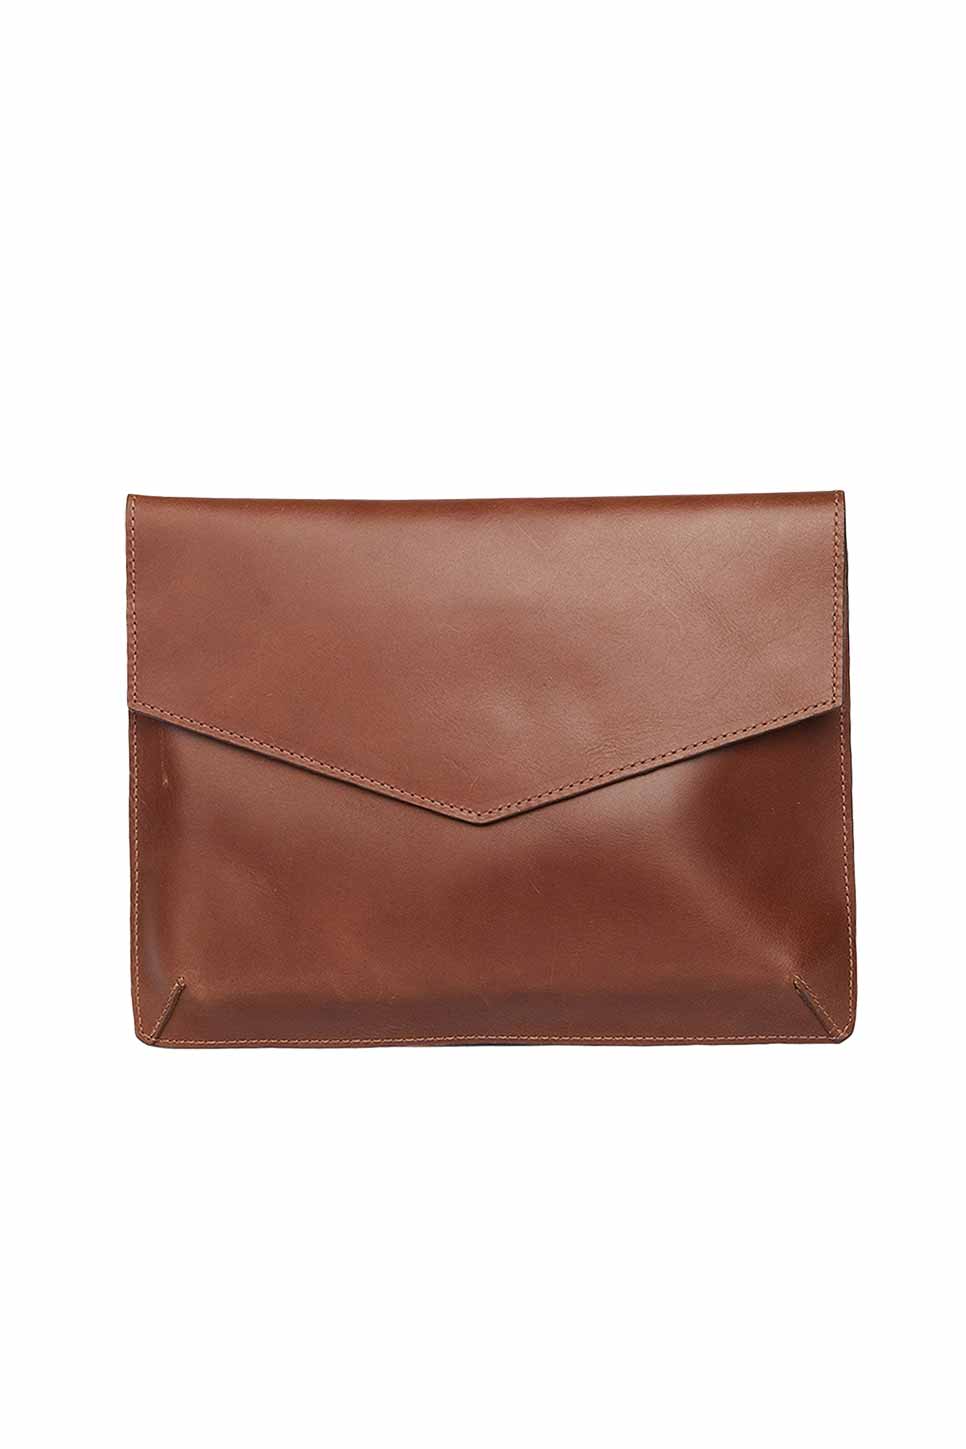 Able - Envelope Clutch - Whiskey